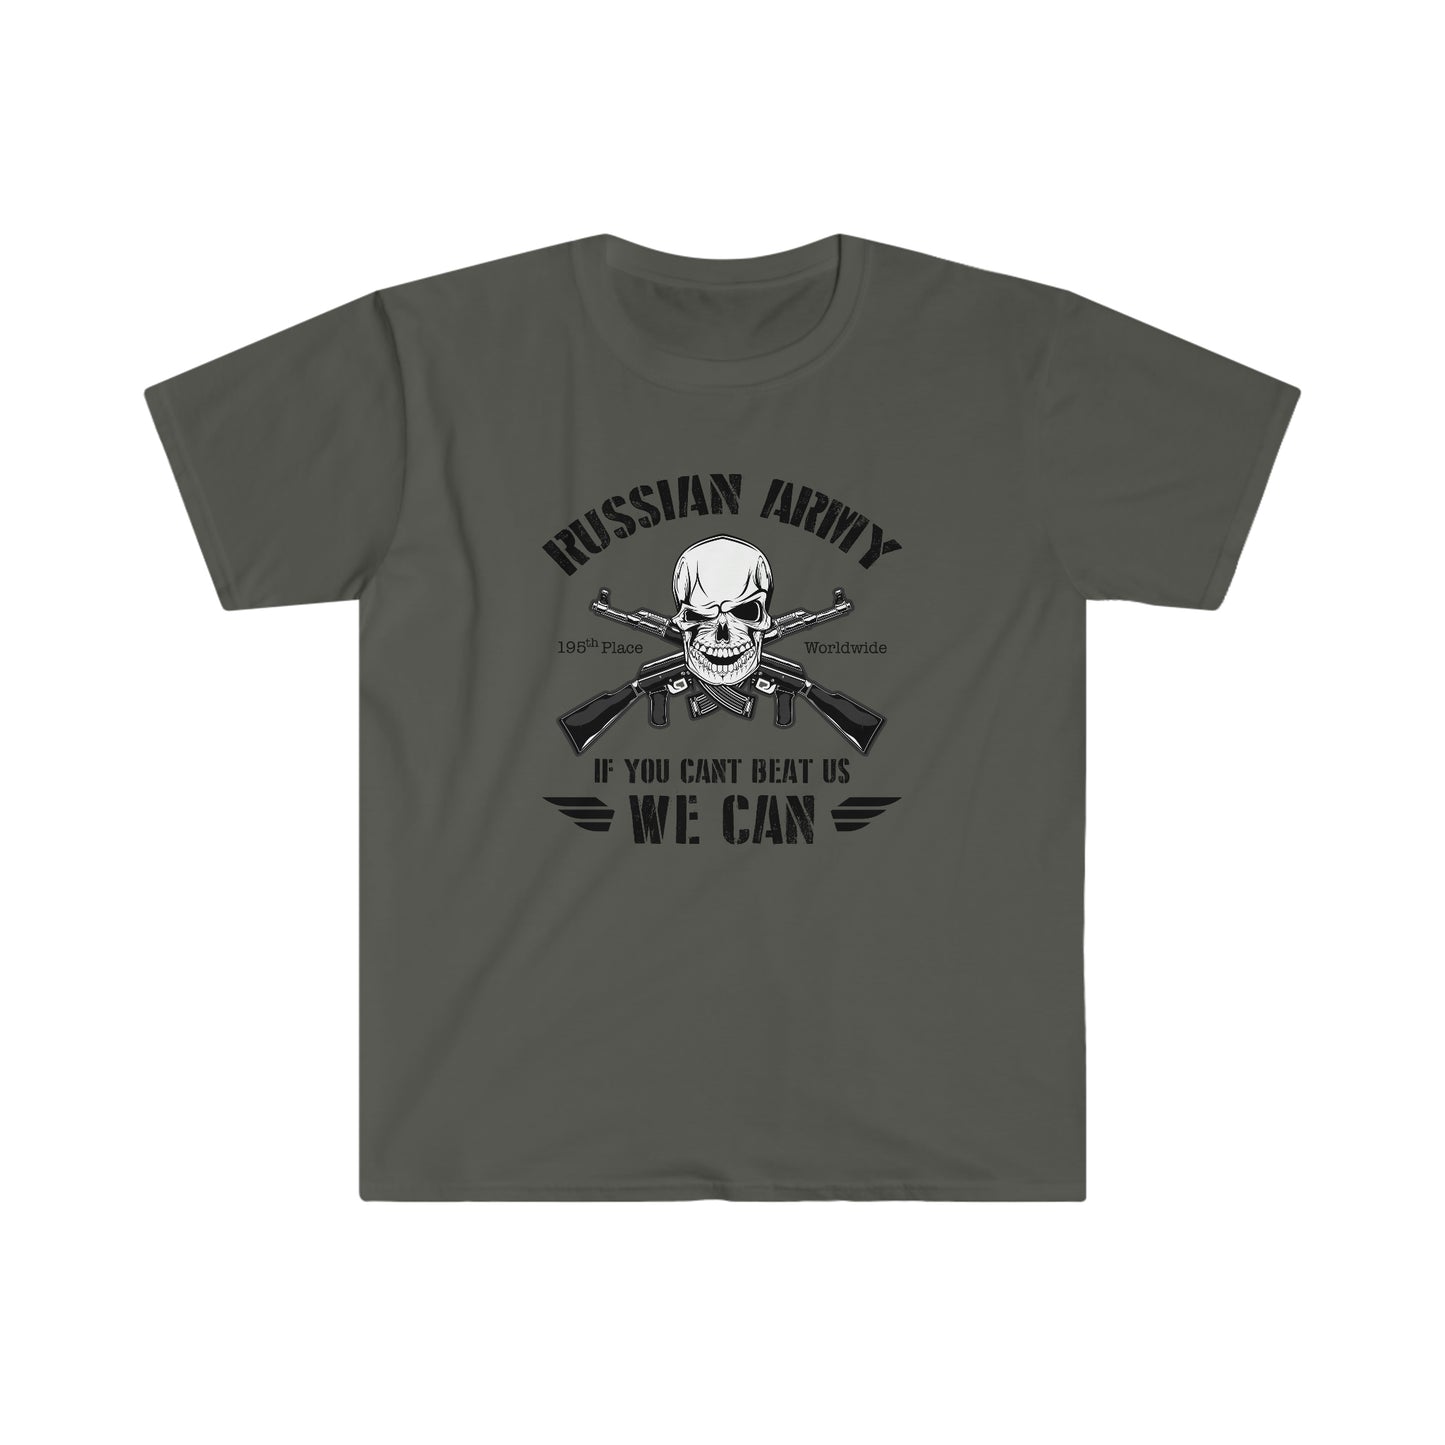 Russian Army "We Can" T-shirt